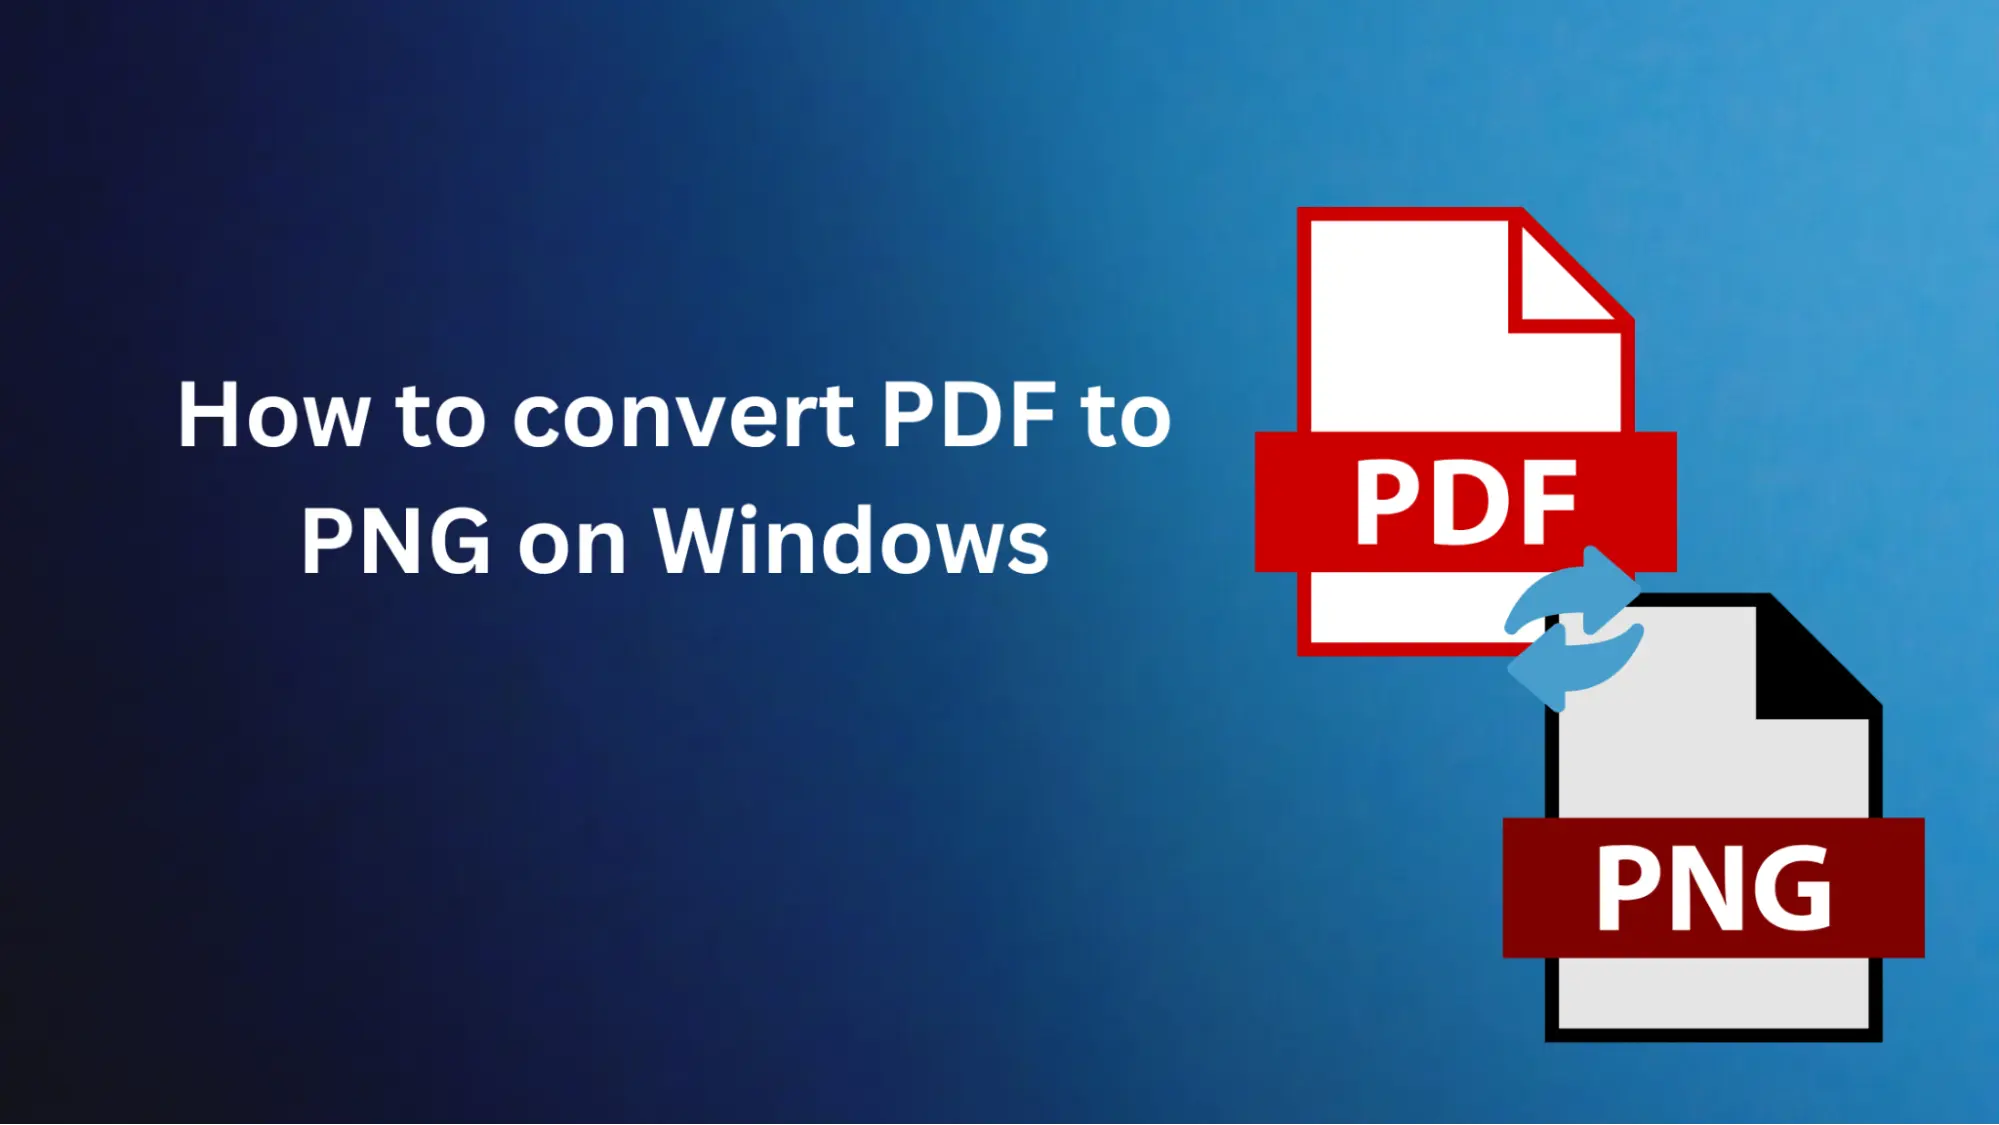 How to convert PDF to PNG on Windows